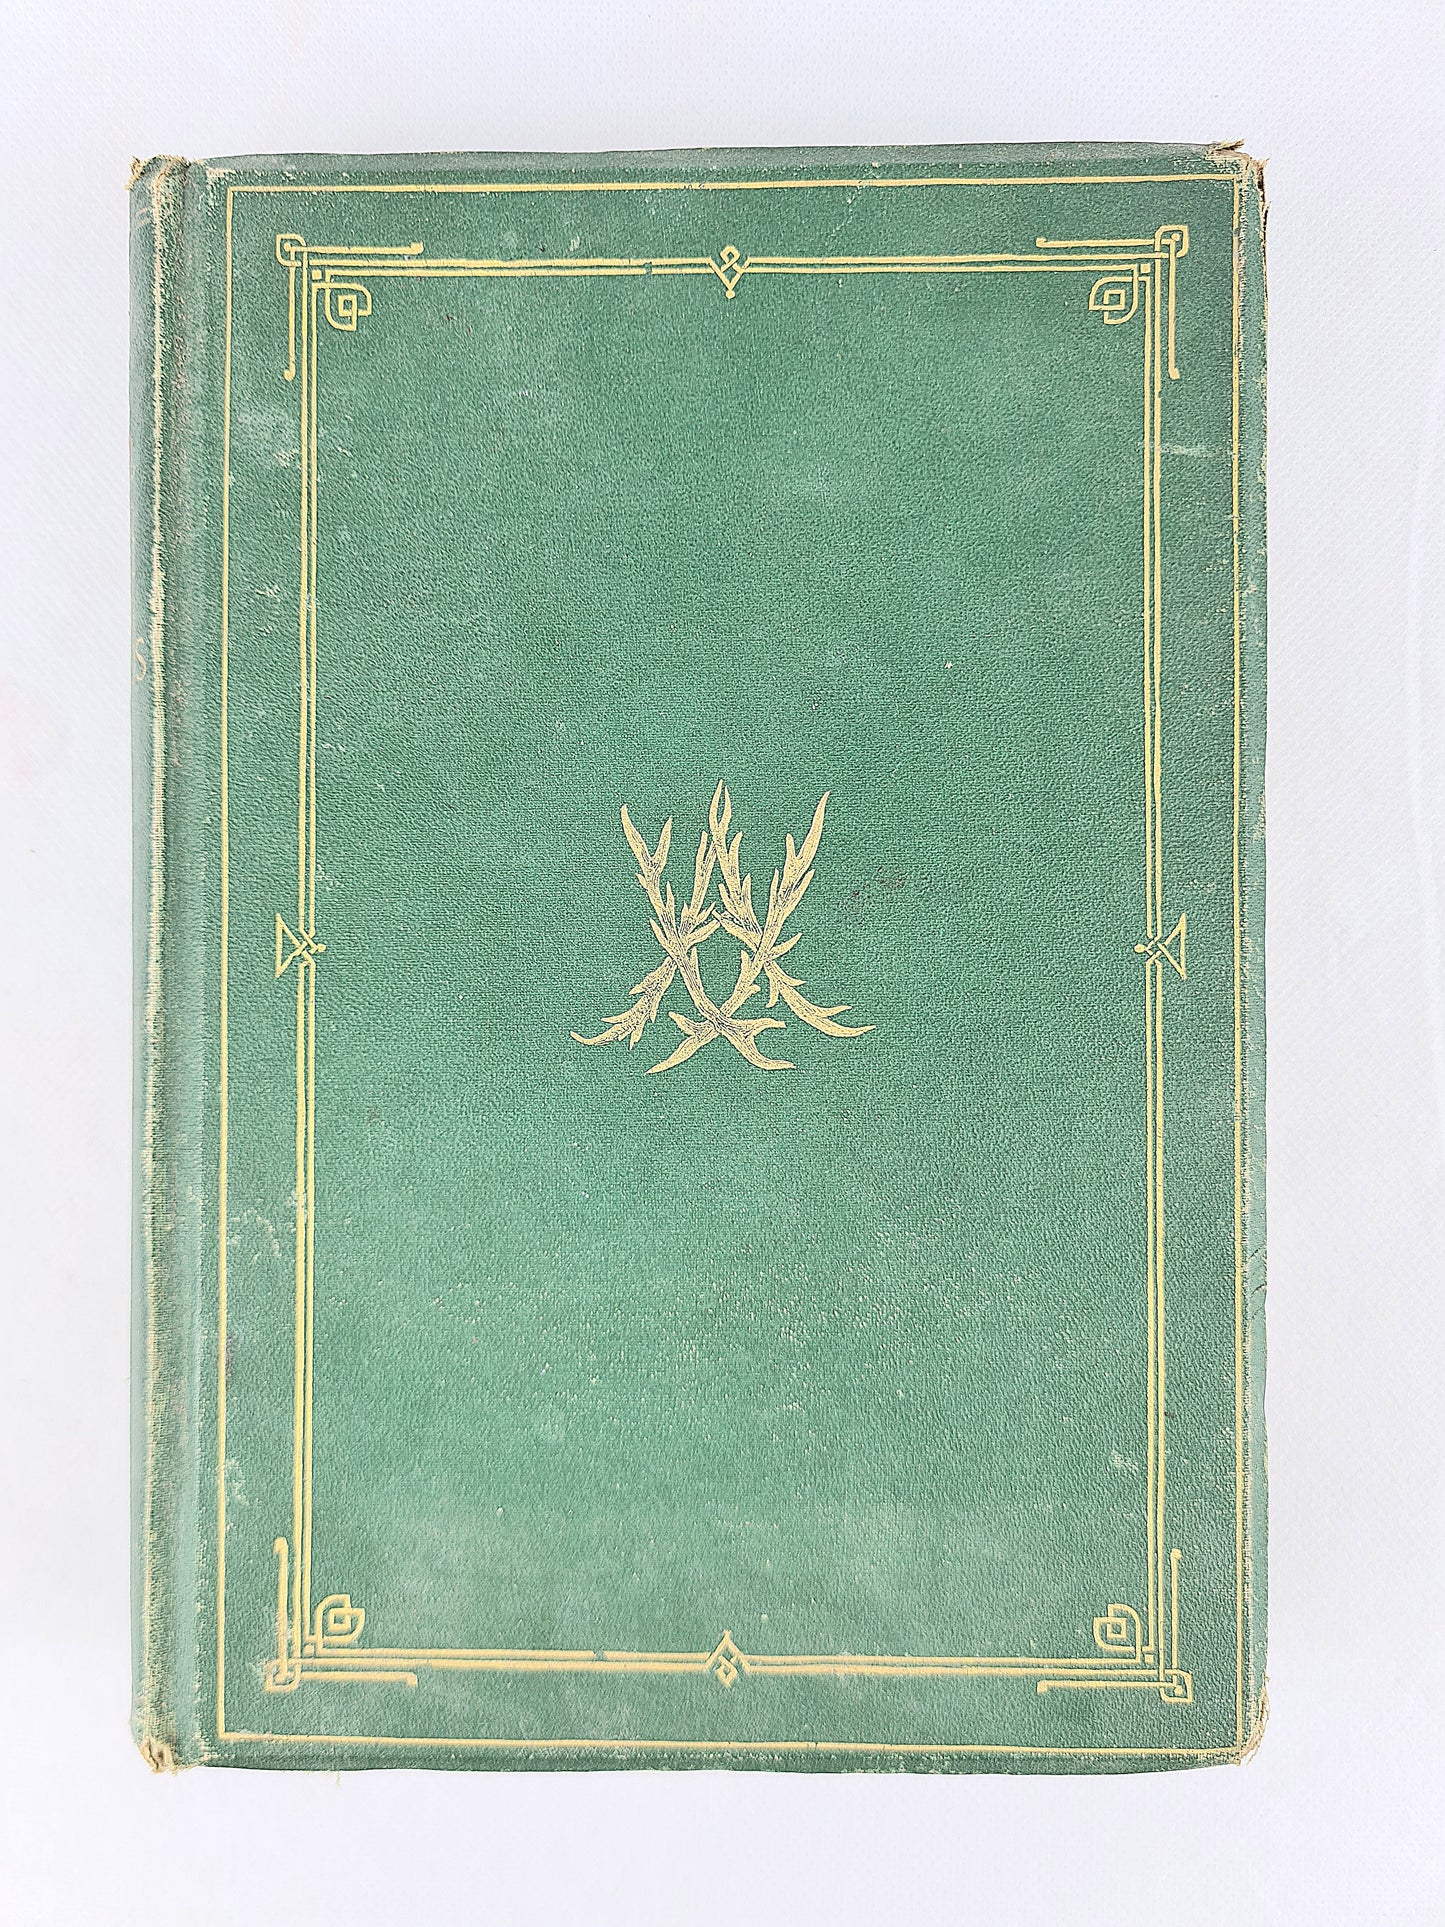 Leaves From The Journal Of Our Life In The Highlands by Queen Victoria. First edition 1868